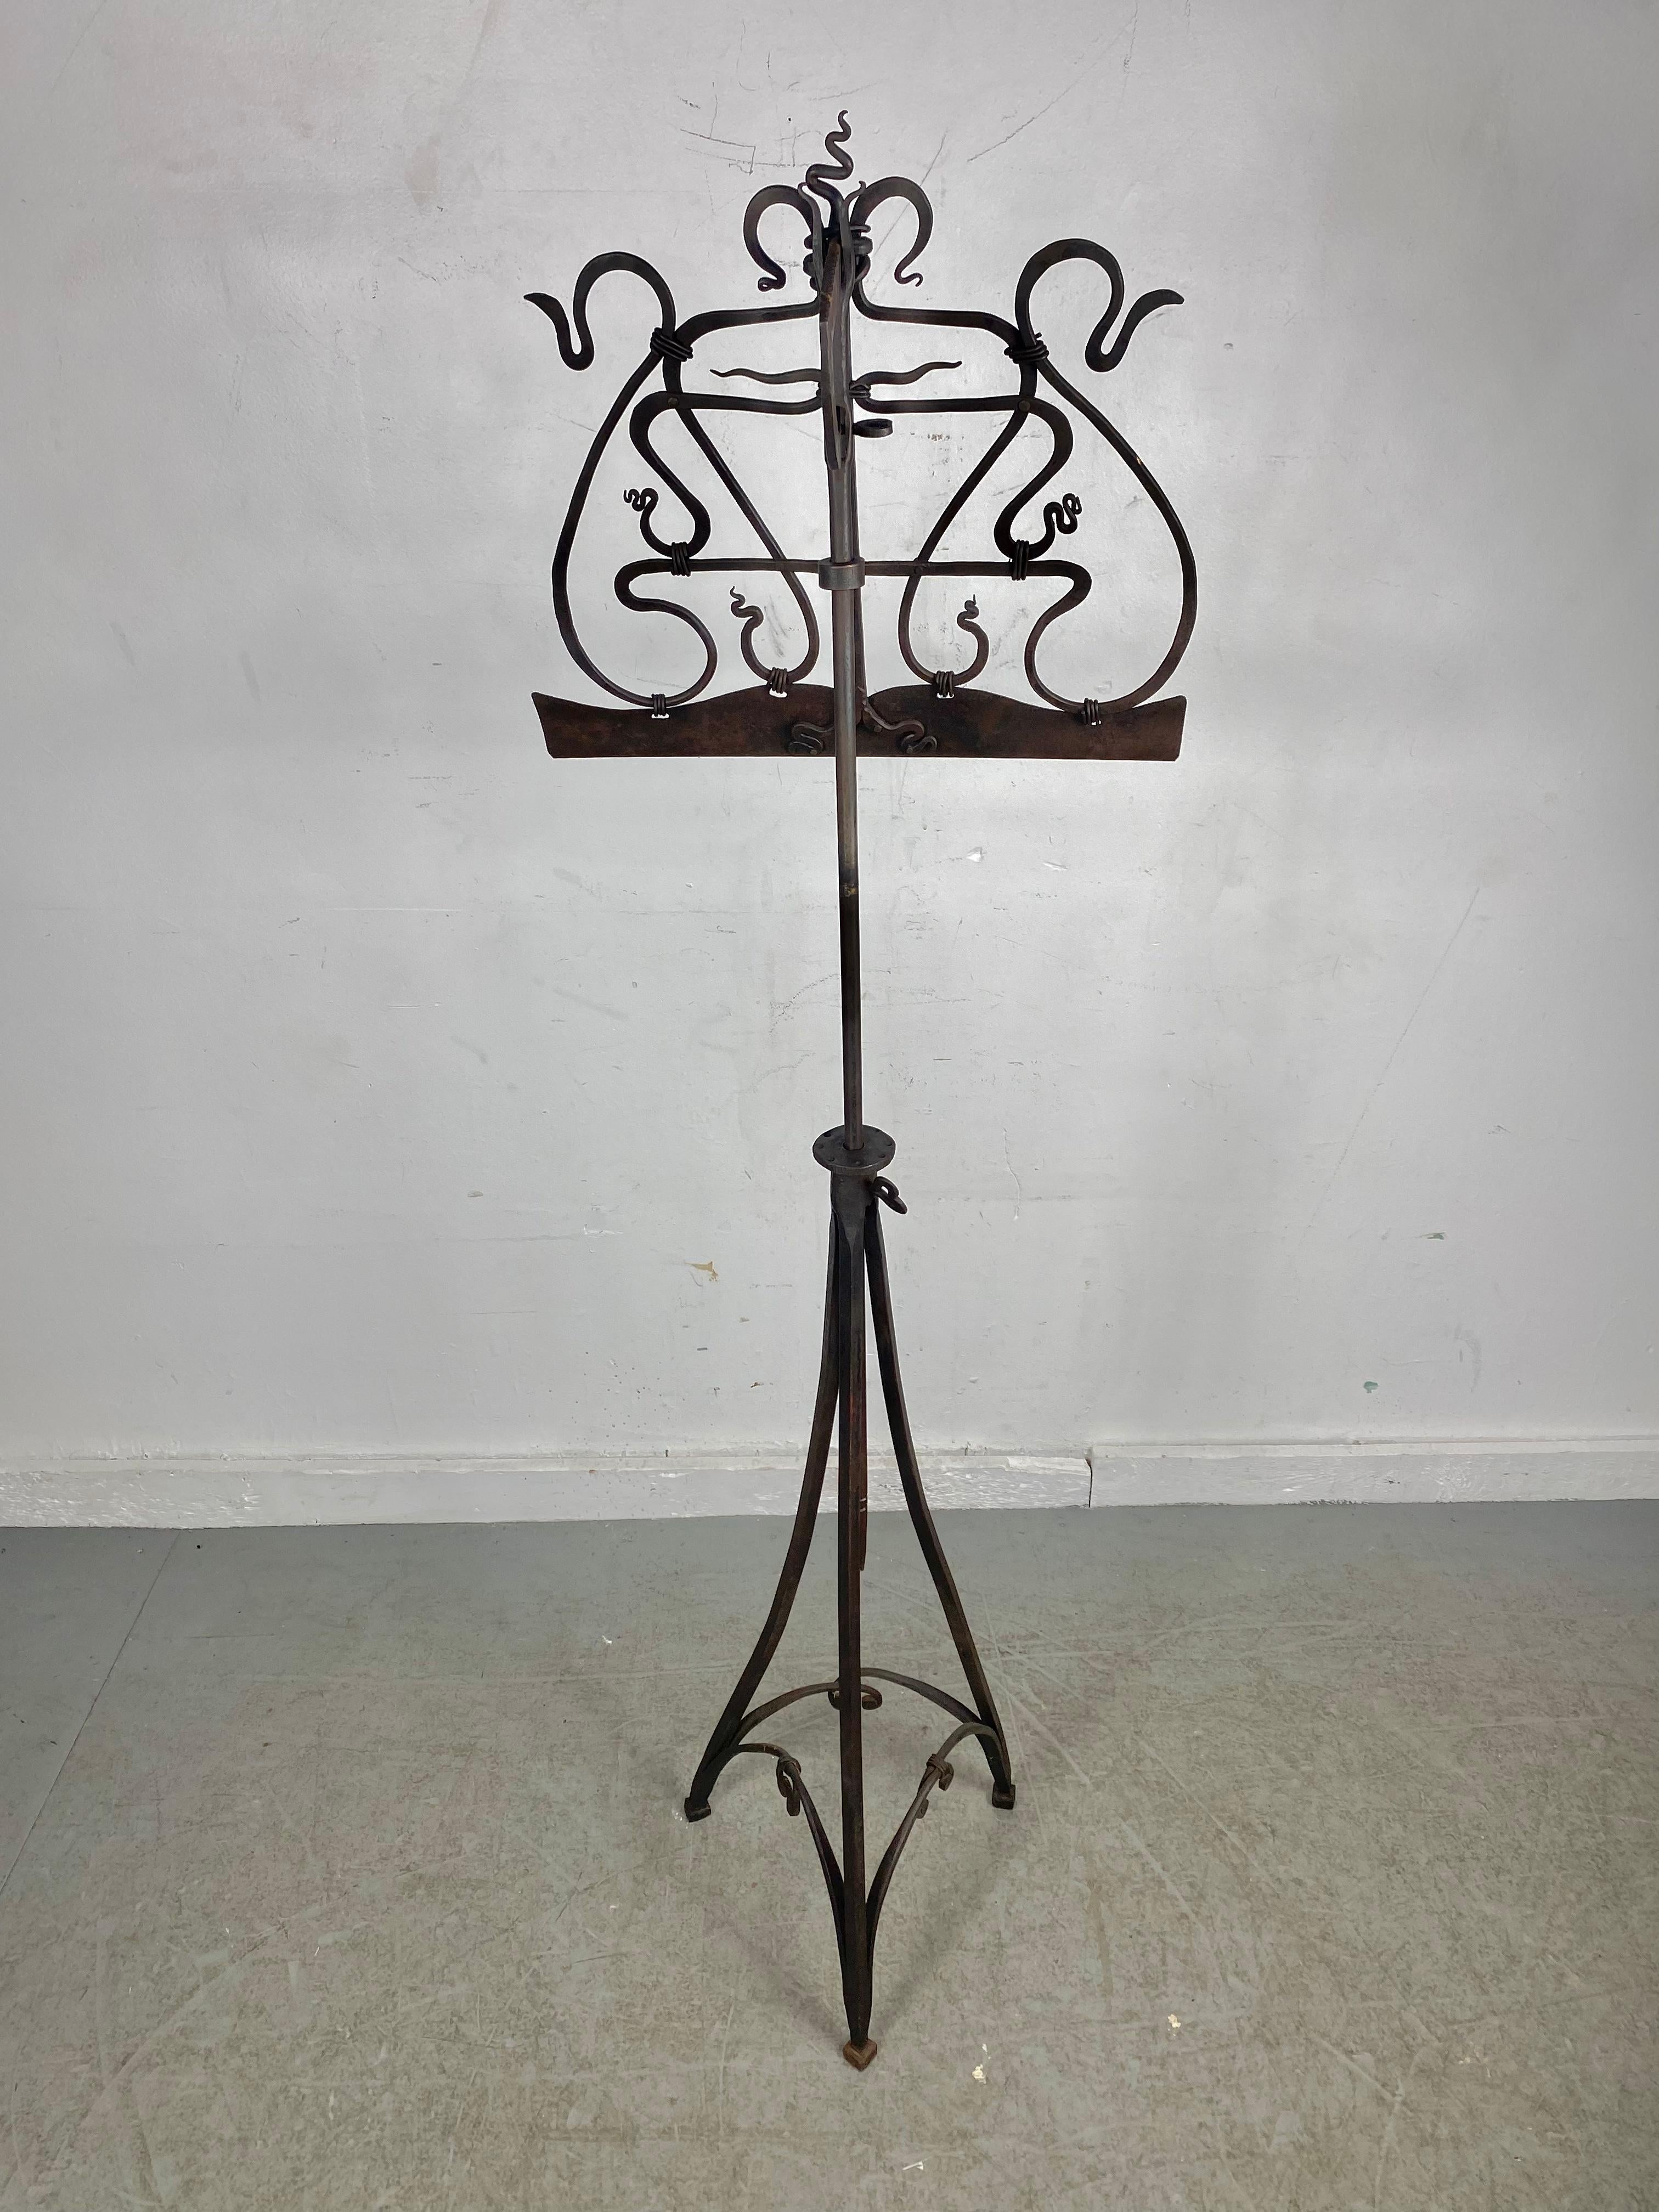 Stunning Hand Crafted Forged Iron Music Stand, Art Nouveau/Arts and Crafts Style,, signed (initialed)) dated 81 Amazing quality and craftsmenship,, Bronzed patina,, Adjustable height.